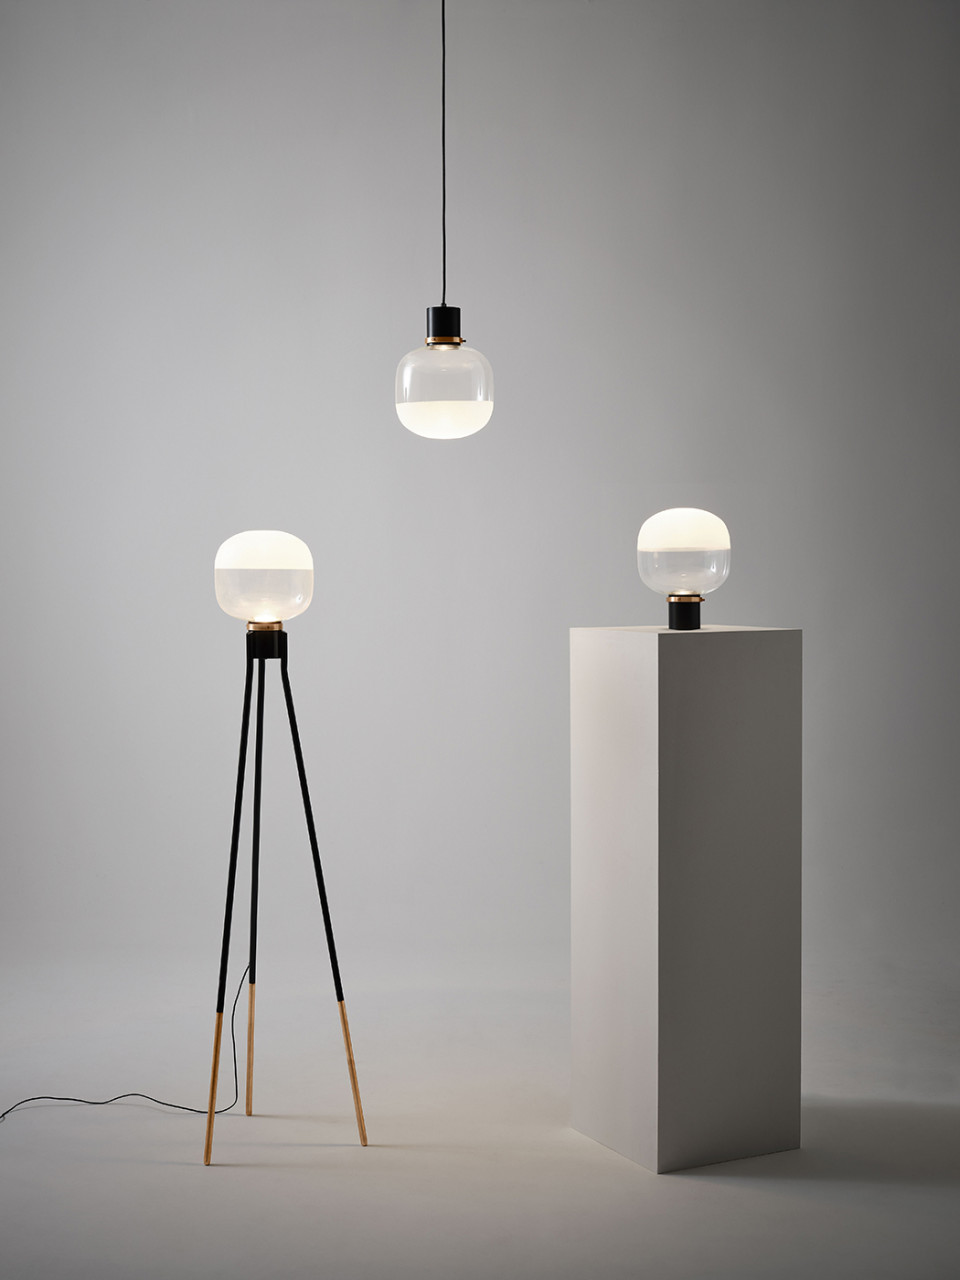 Ghost lamp collection by MIDJ